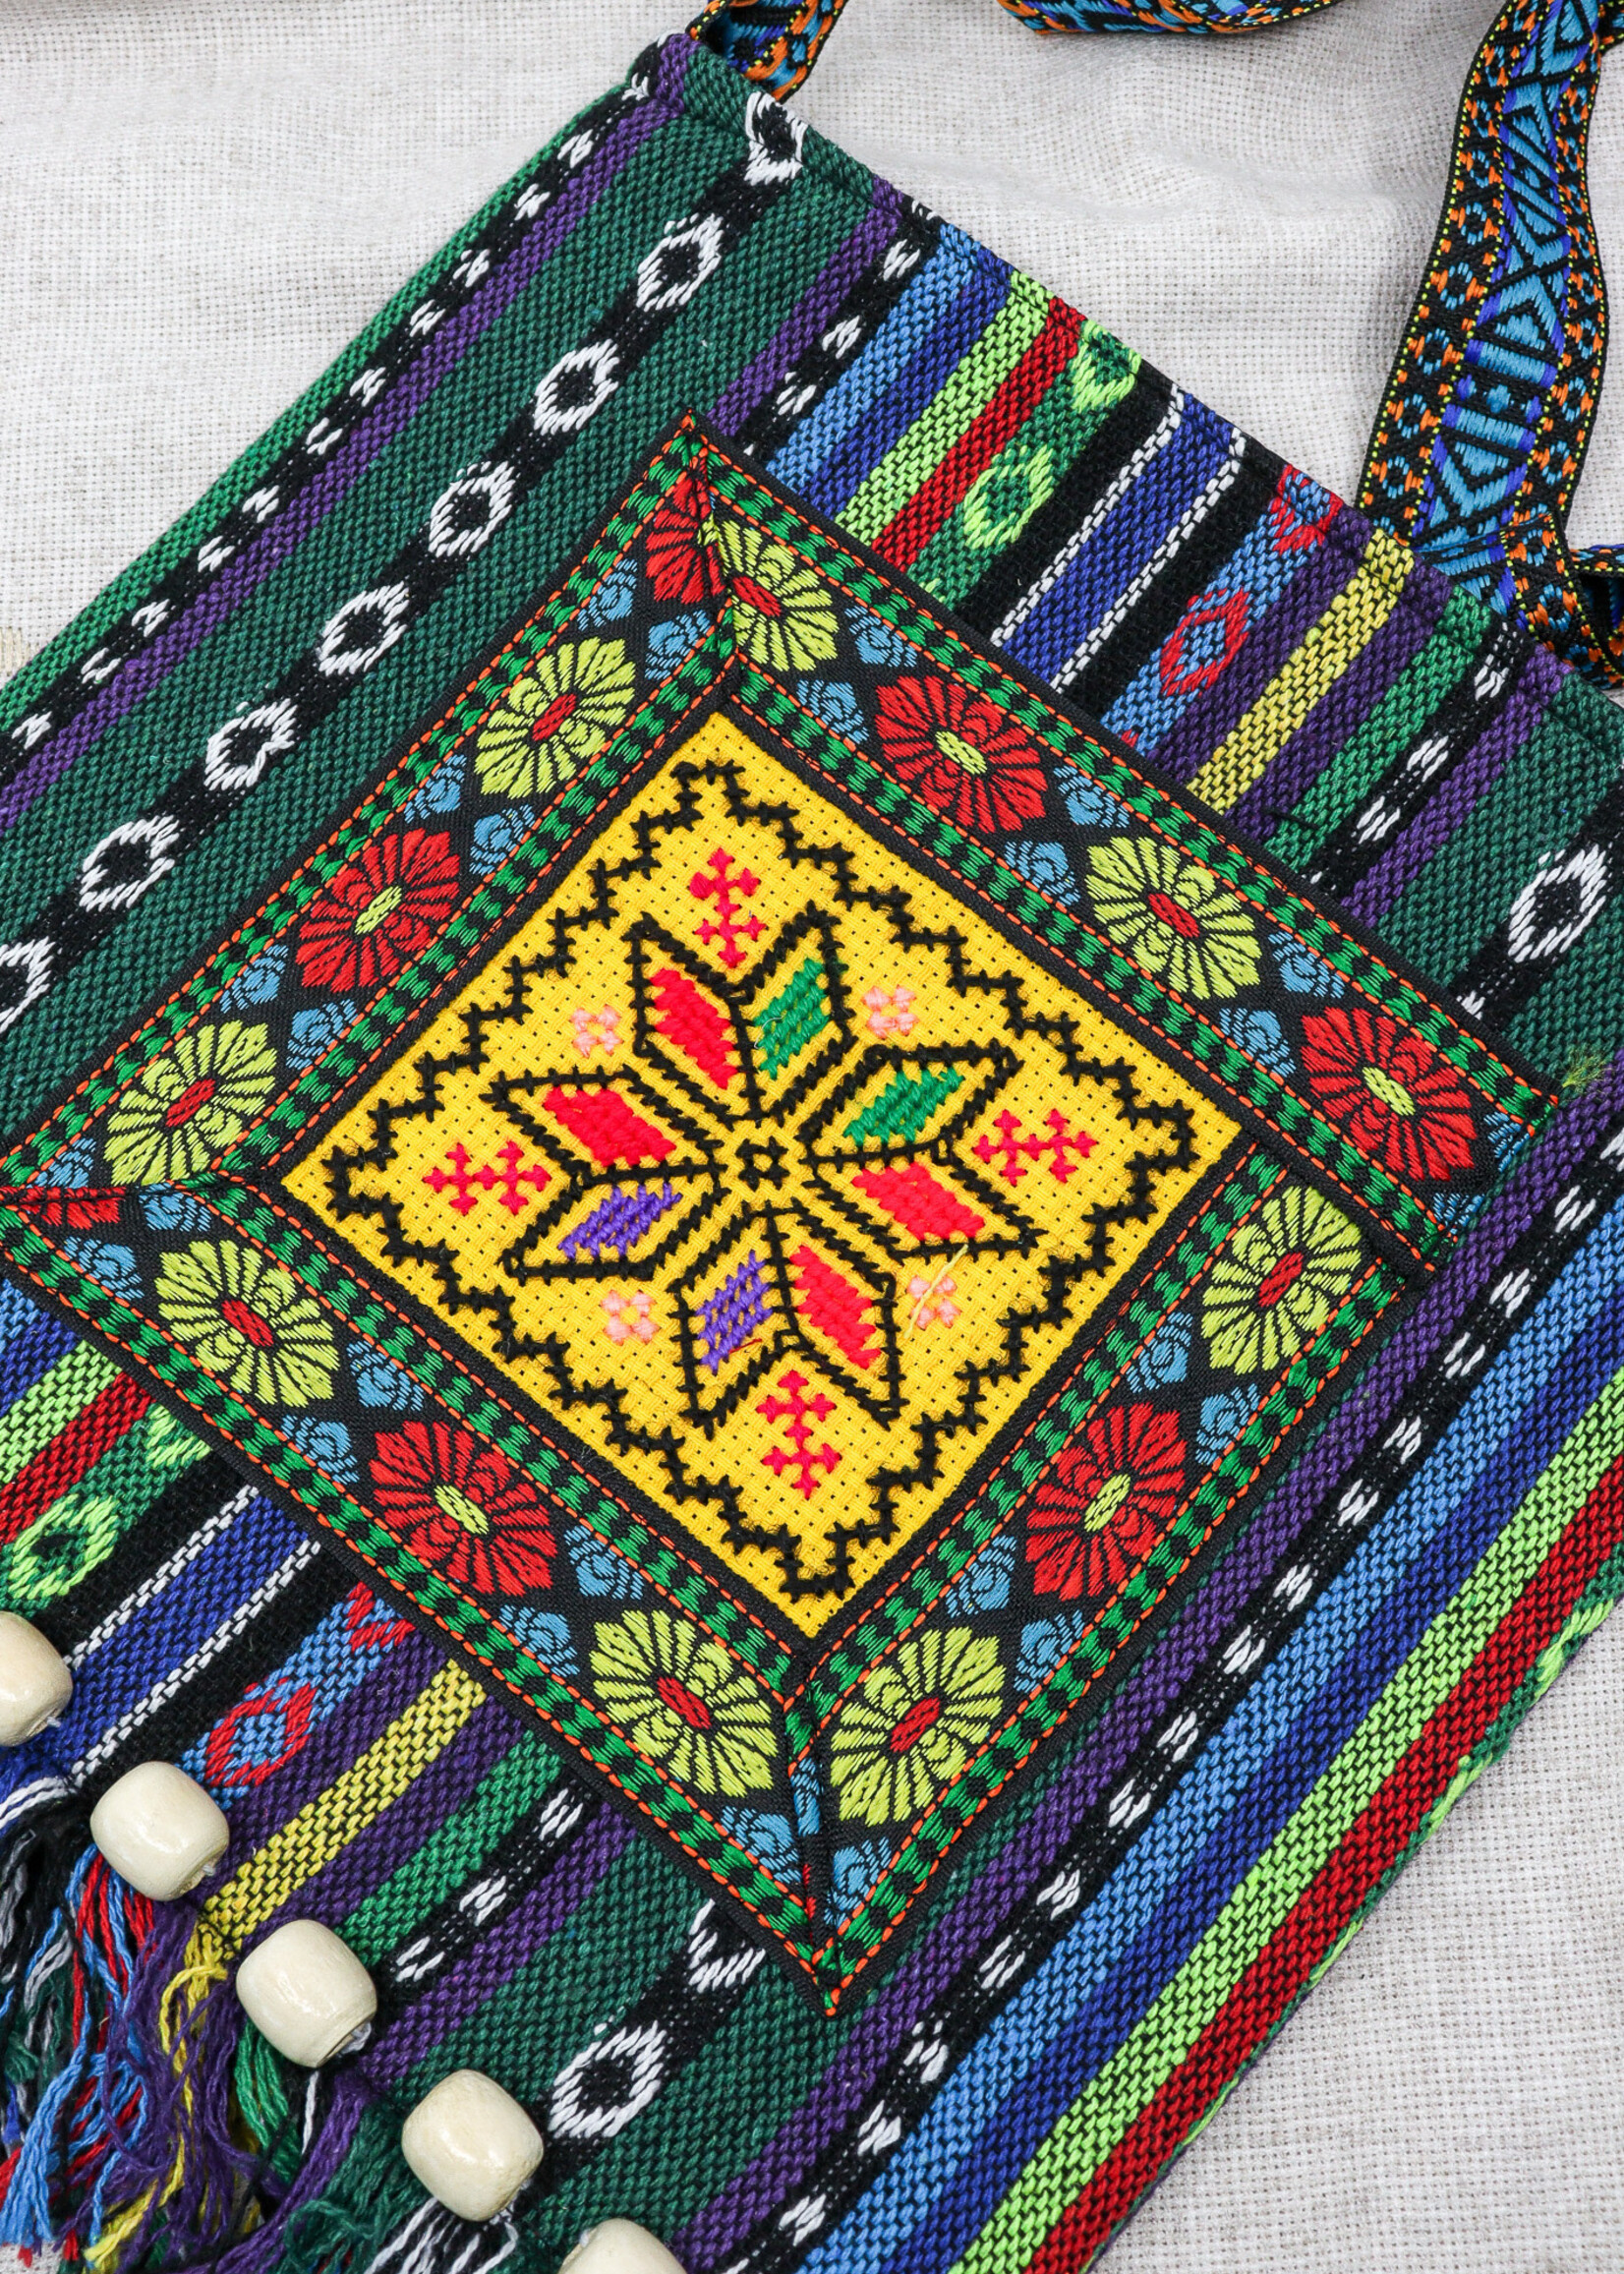 ACCESSORIES -  Embroidered Tote bag  made of wool (Ukraine)